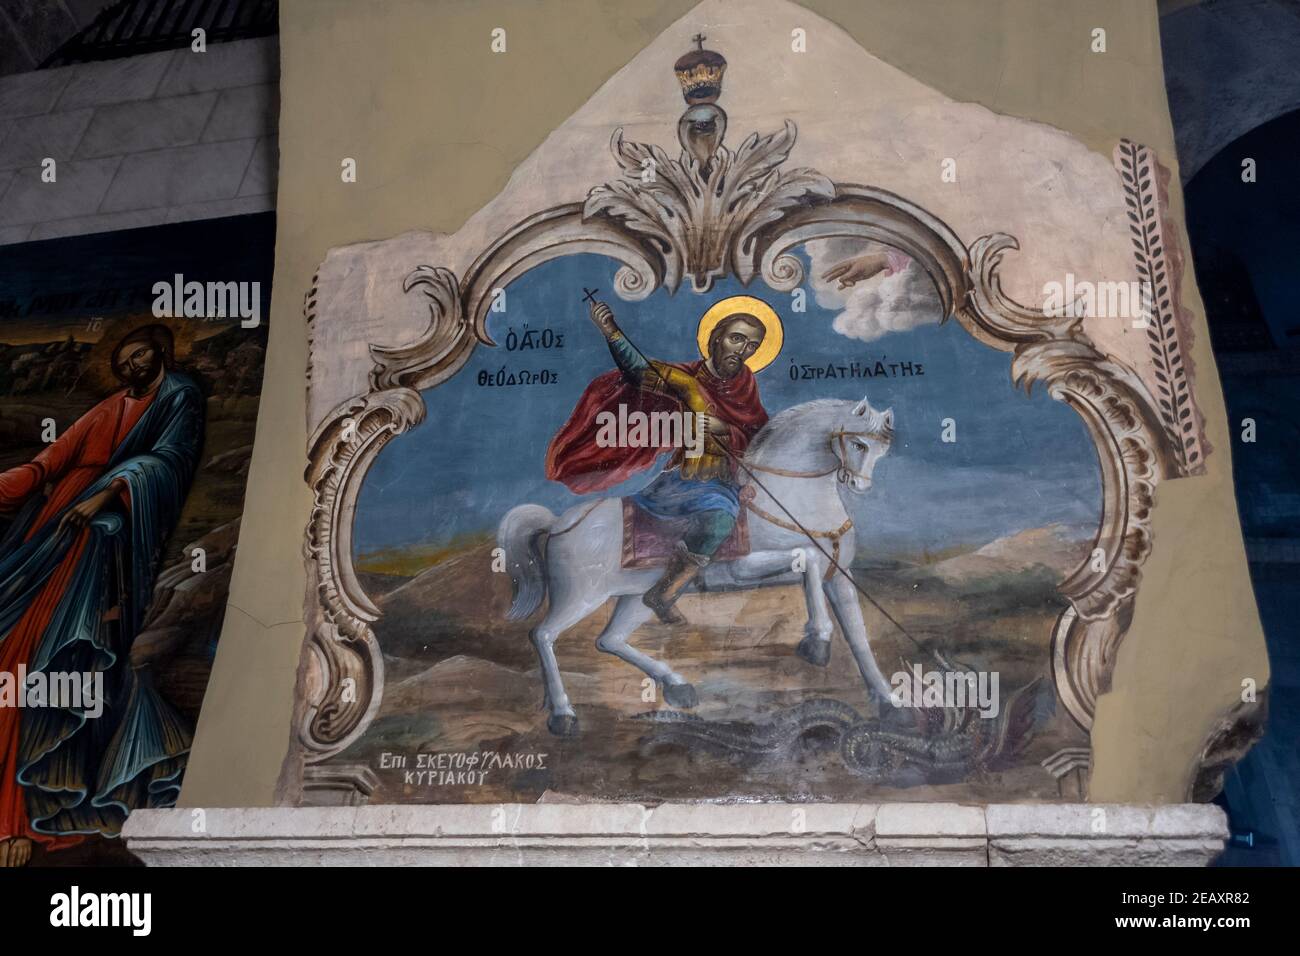 An old painting depicting an orthodox Christian legend in which Saint George slays a dragon that demanded human sacrifices at a northern archway in the Church of Holy Sepulchre in old city of East Jerusalem Israel Stock Photo